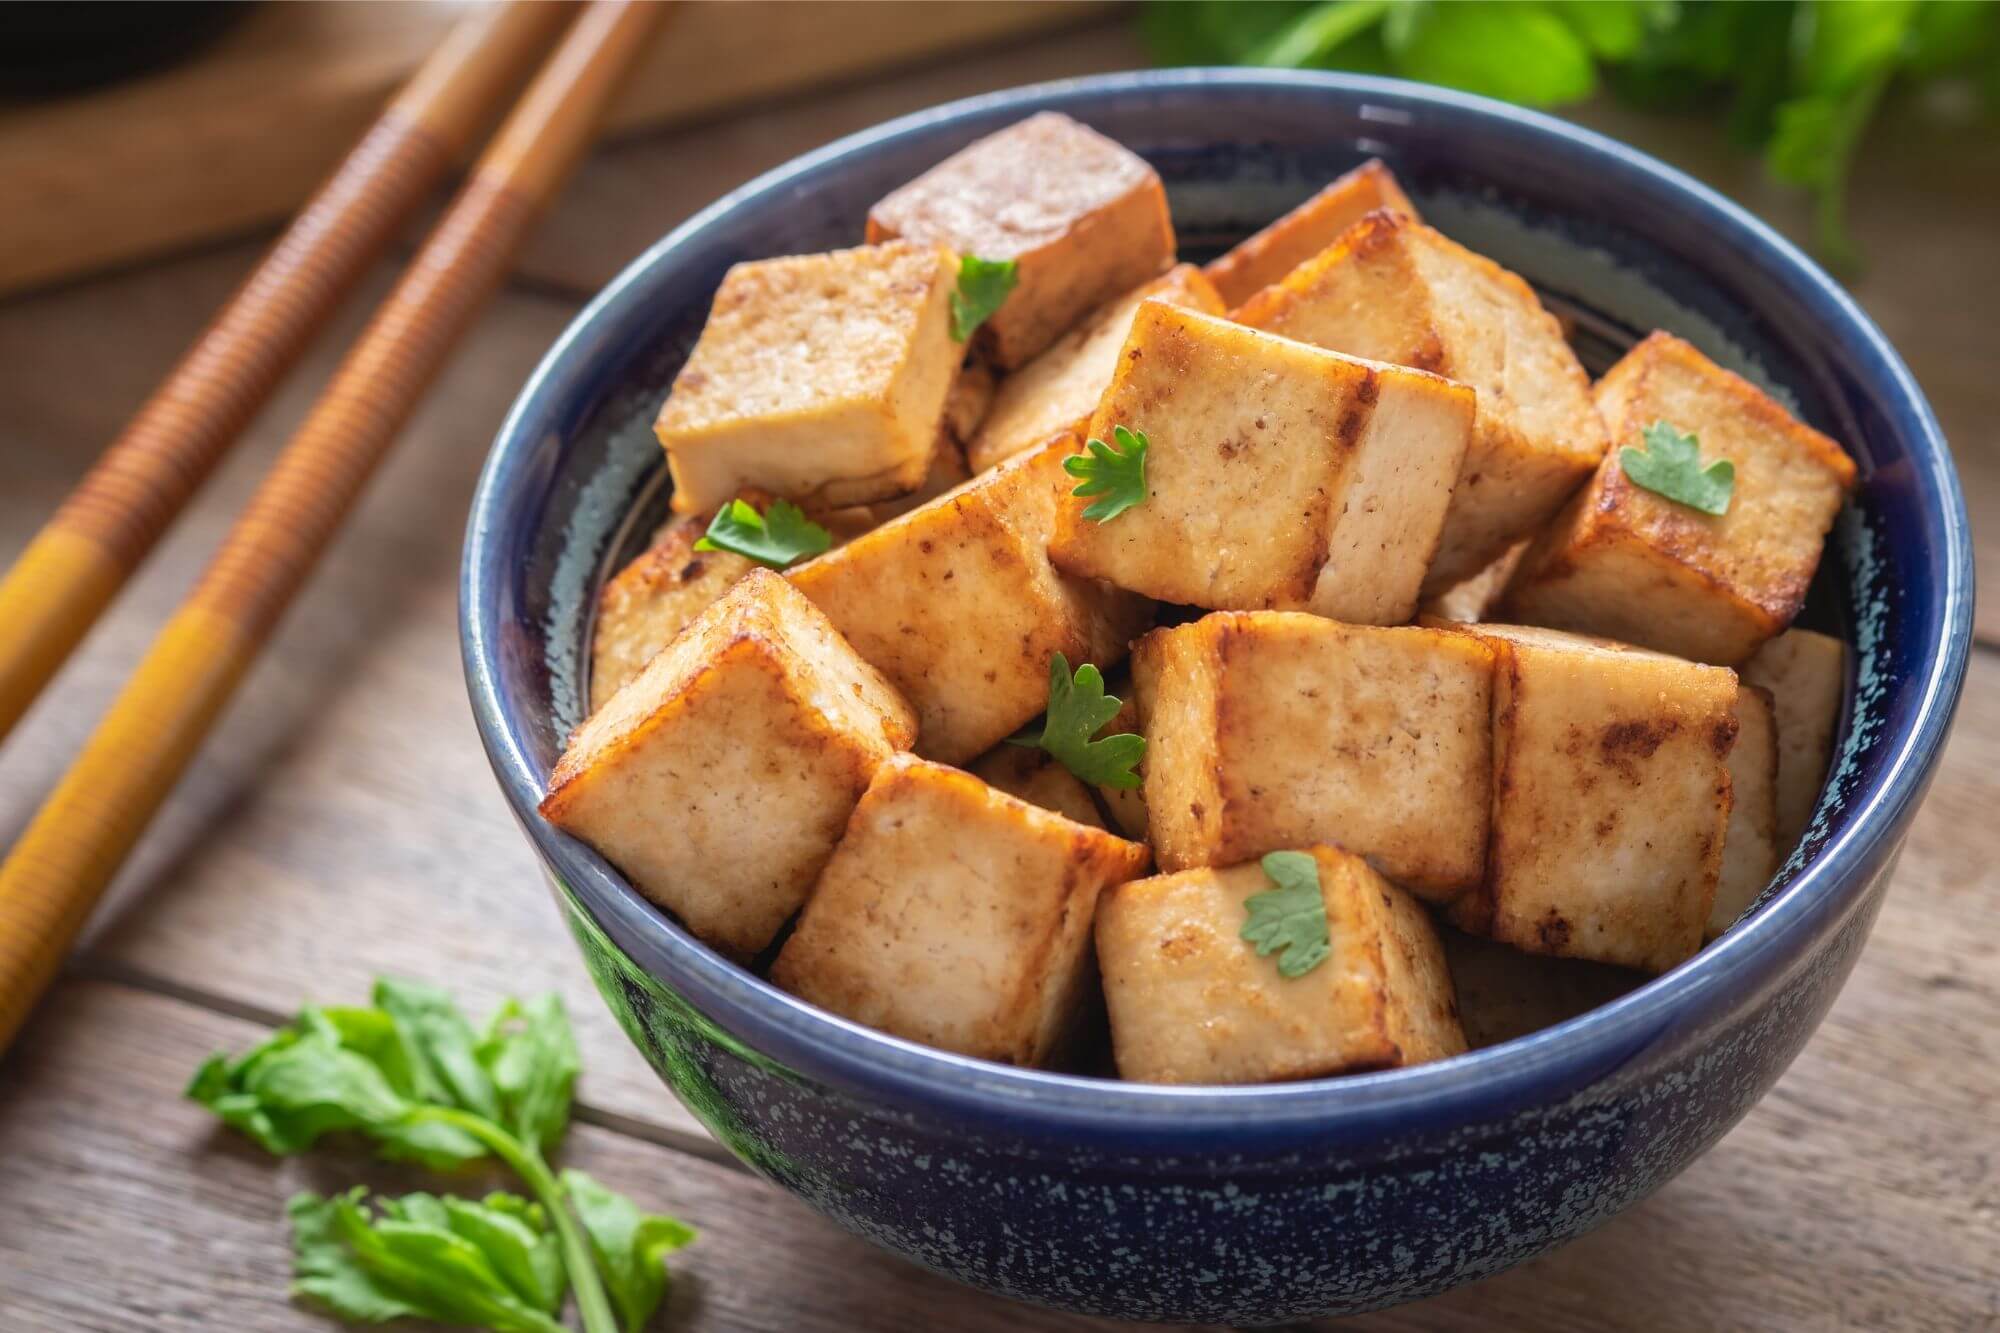 Tofu in a bowl with chopsticks on a wooden table